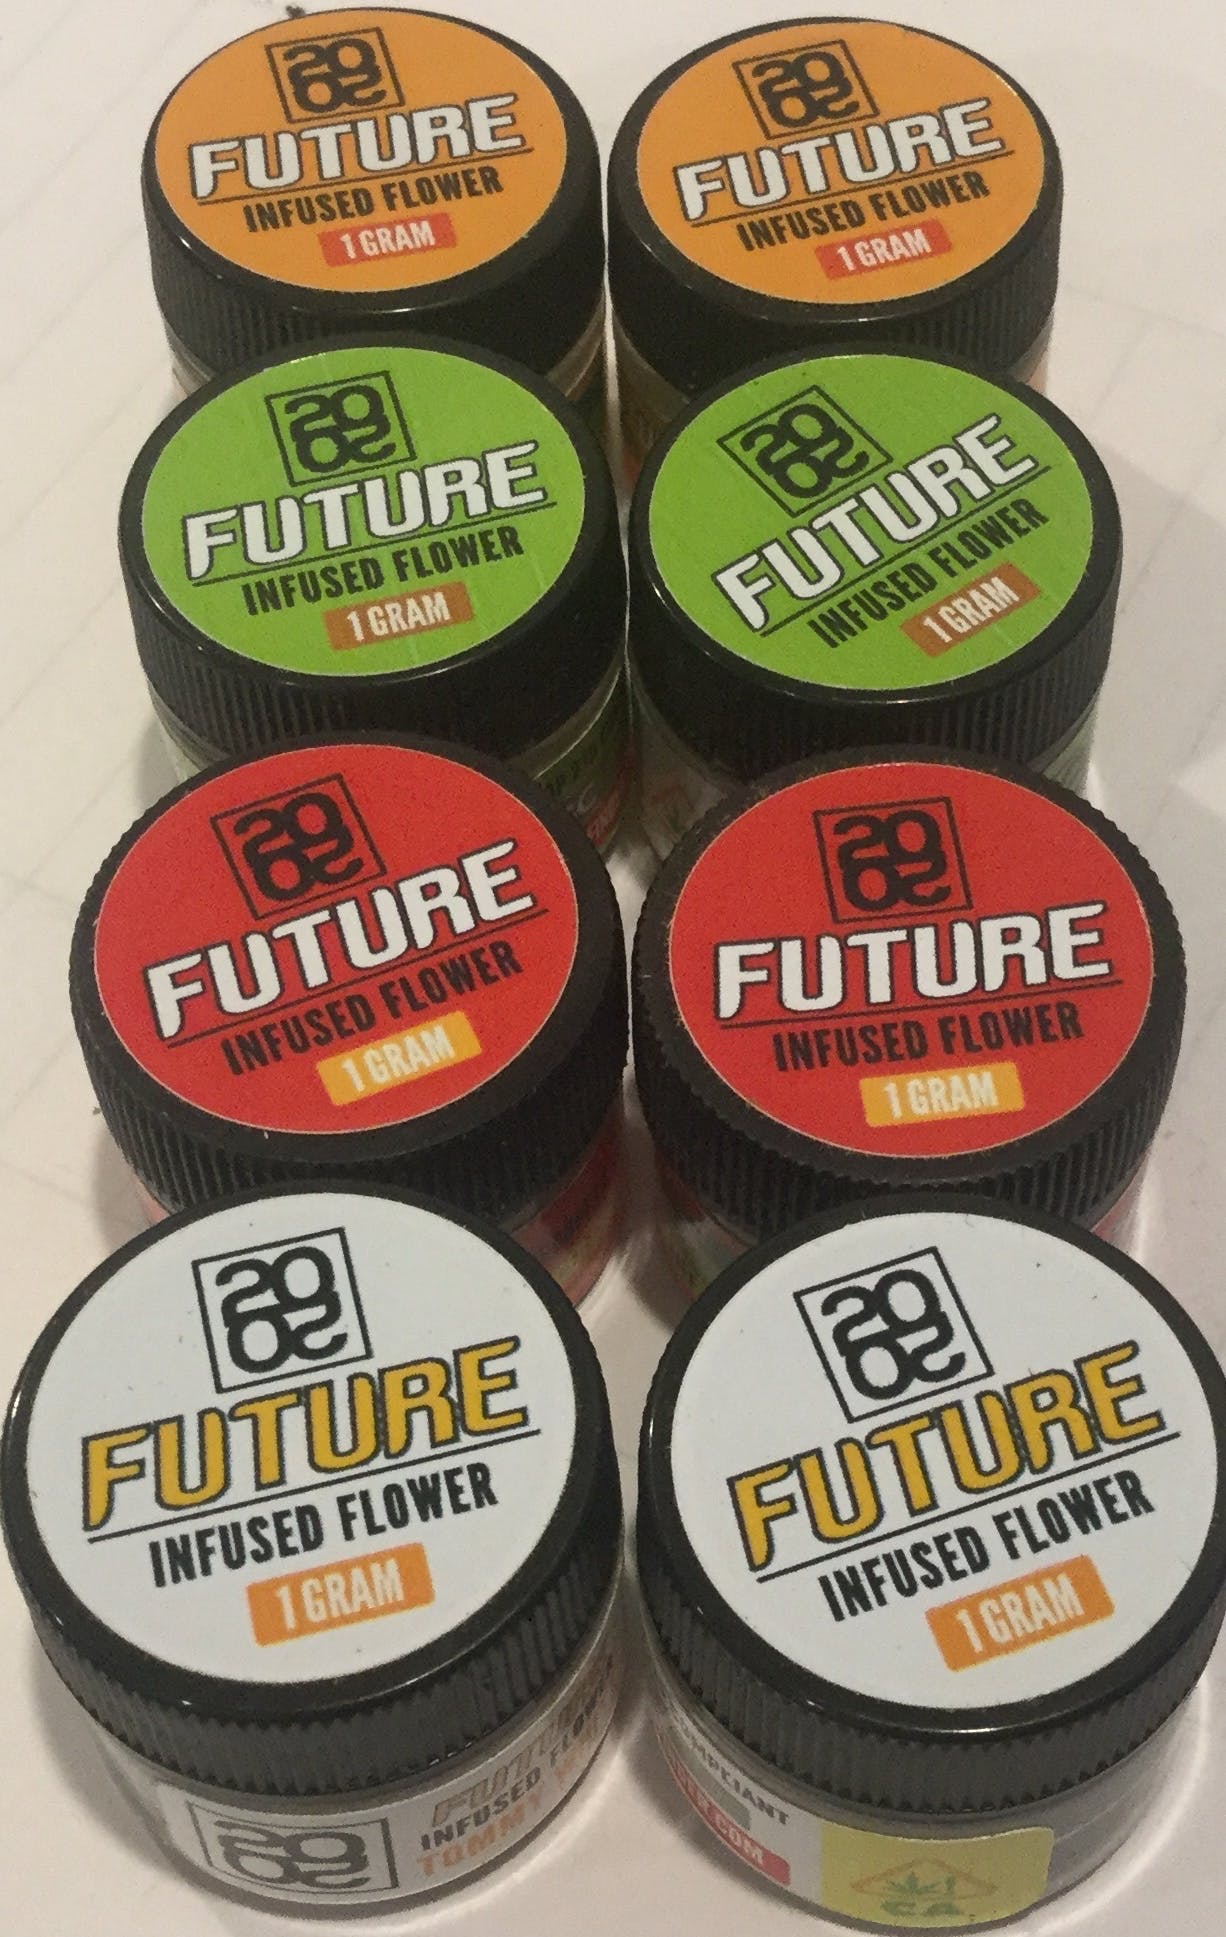 concentrate-future-2020-infused-flower